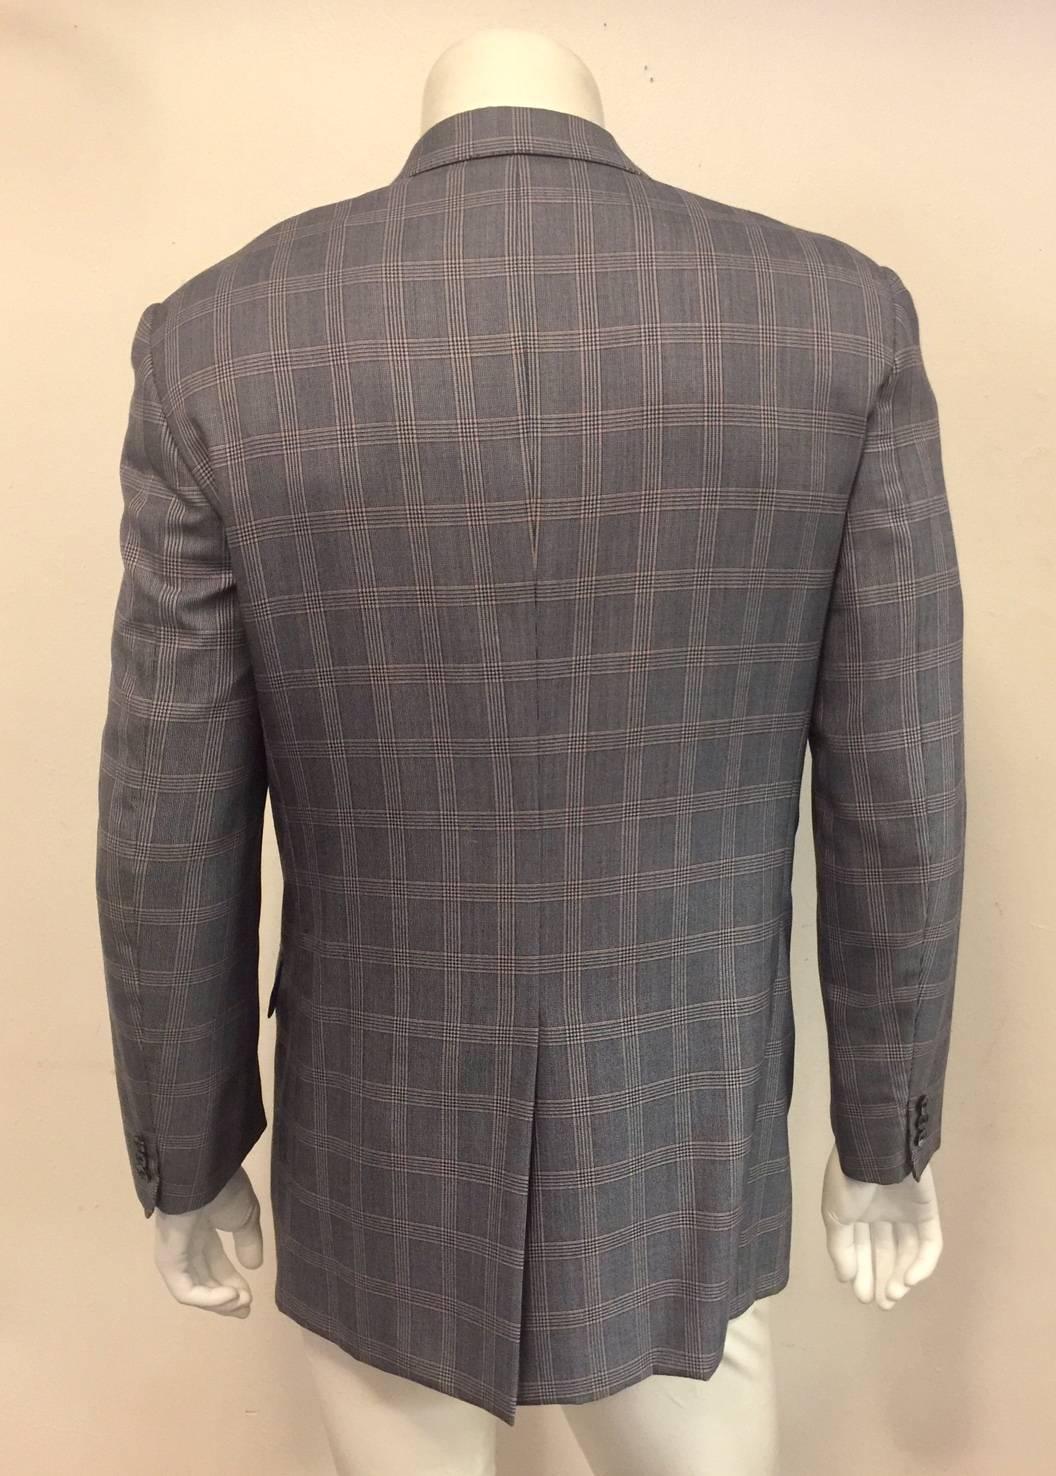 Gray Men's Brioni Made for Maus & Hoffman Palentino Wool and Silk Jacket Sz 42L